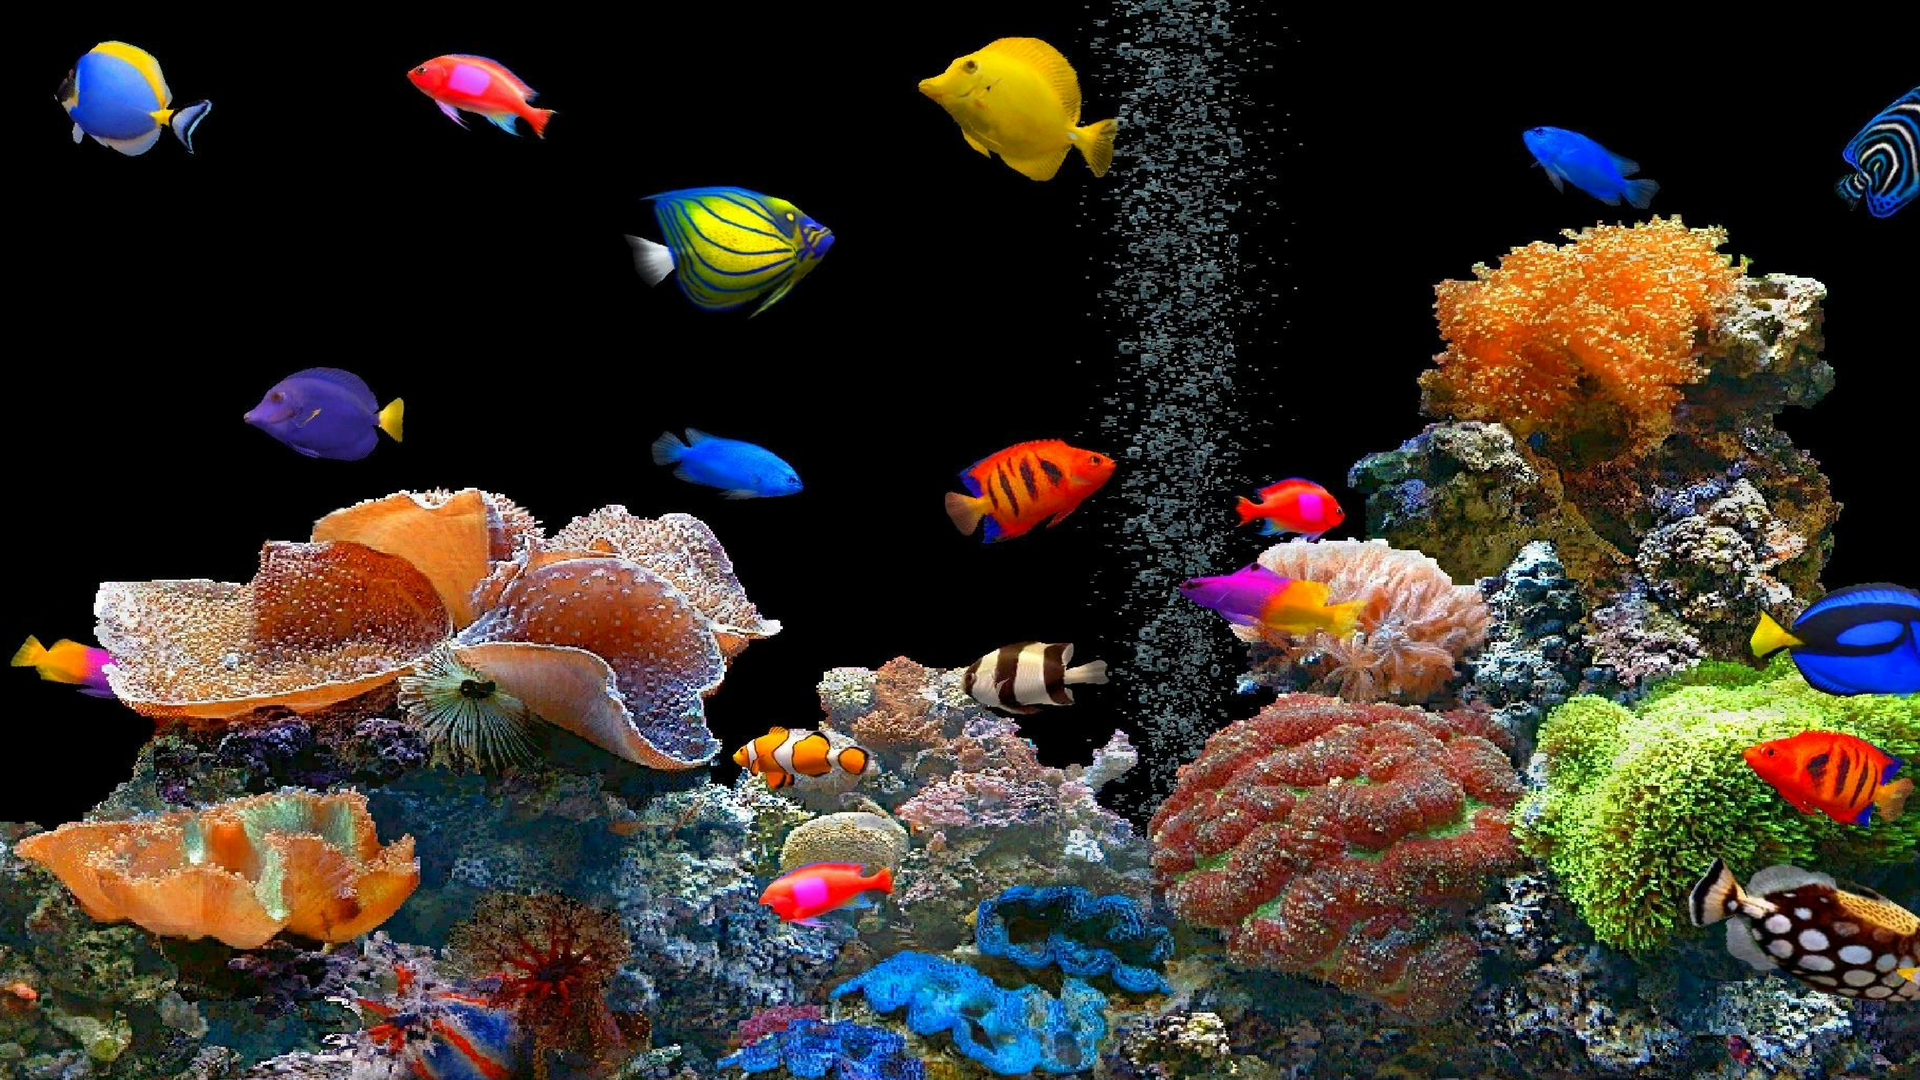 40 Aquarium HD Wallpapers and Backgrounds